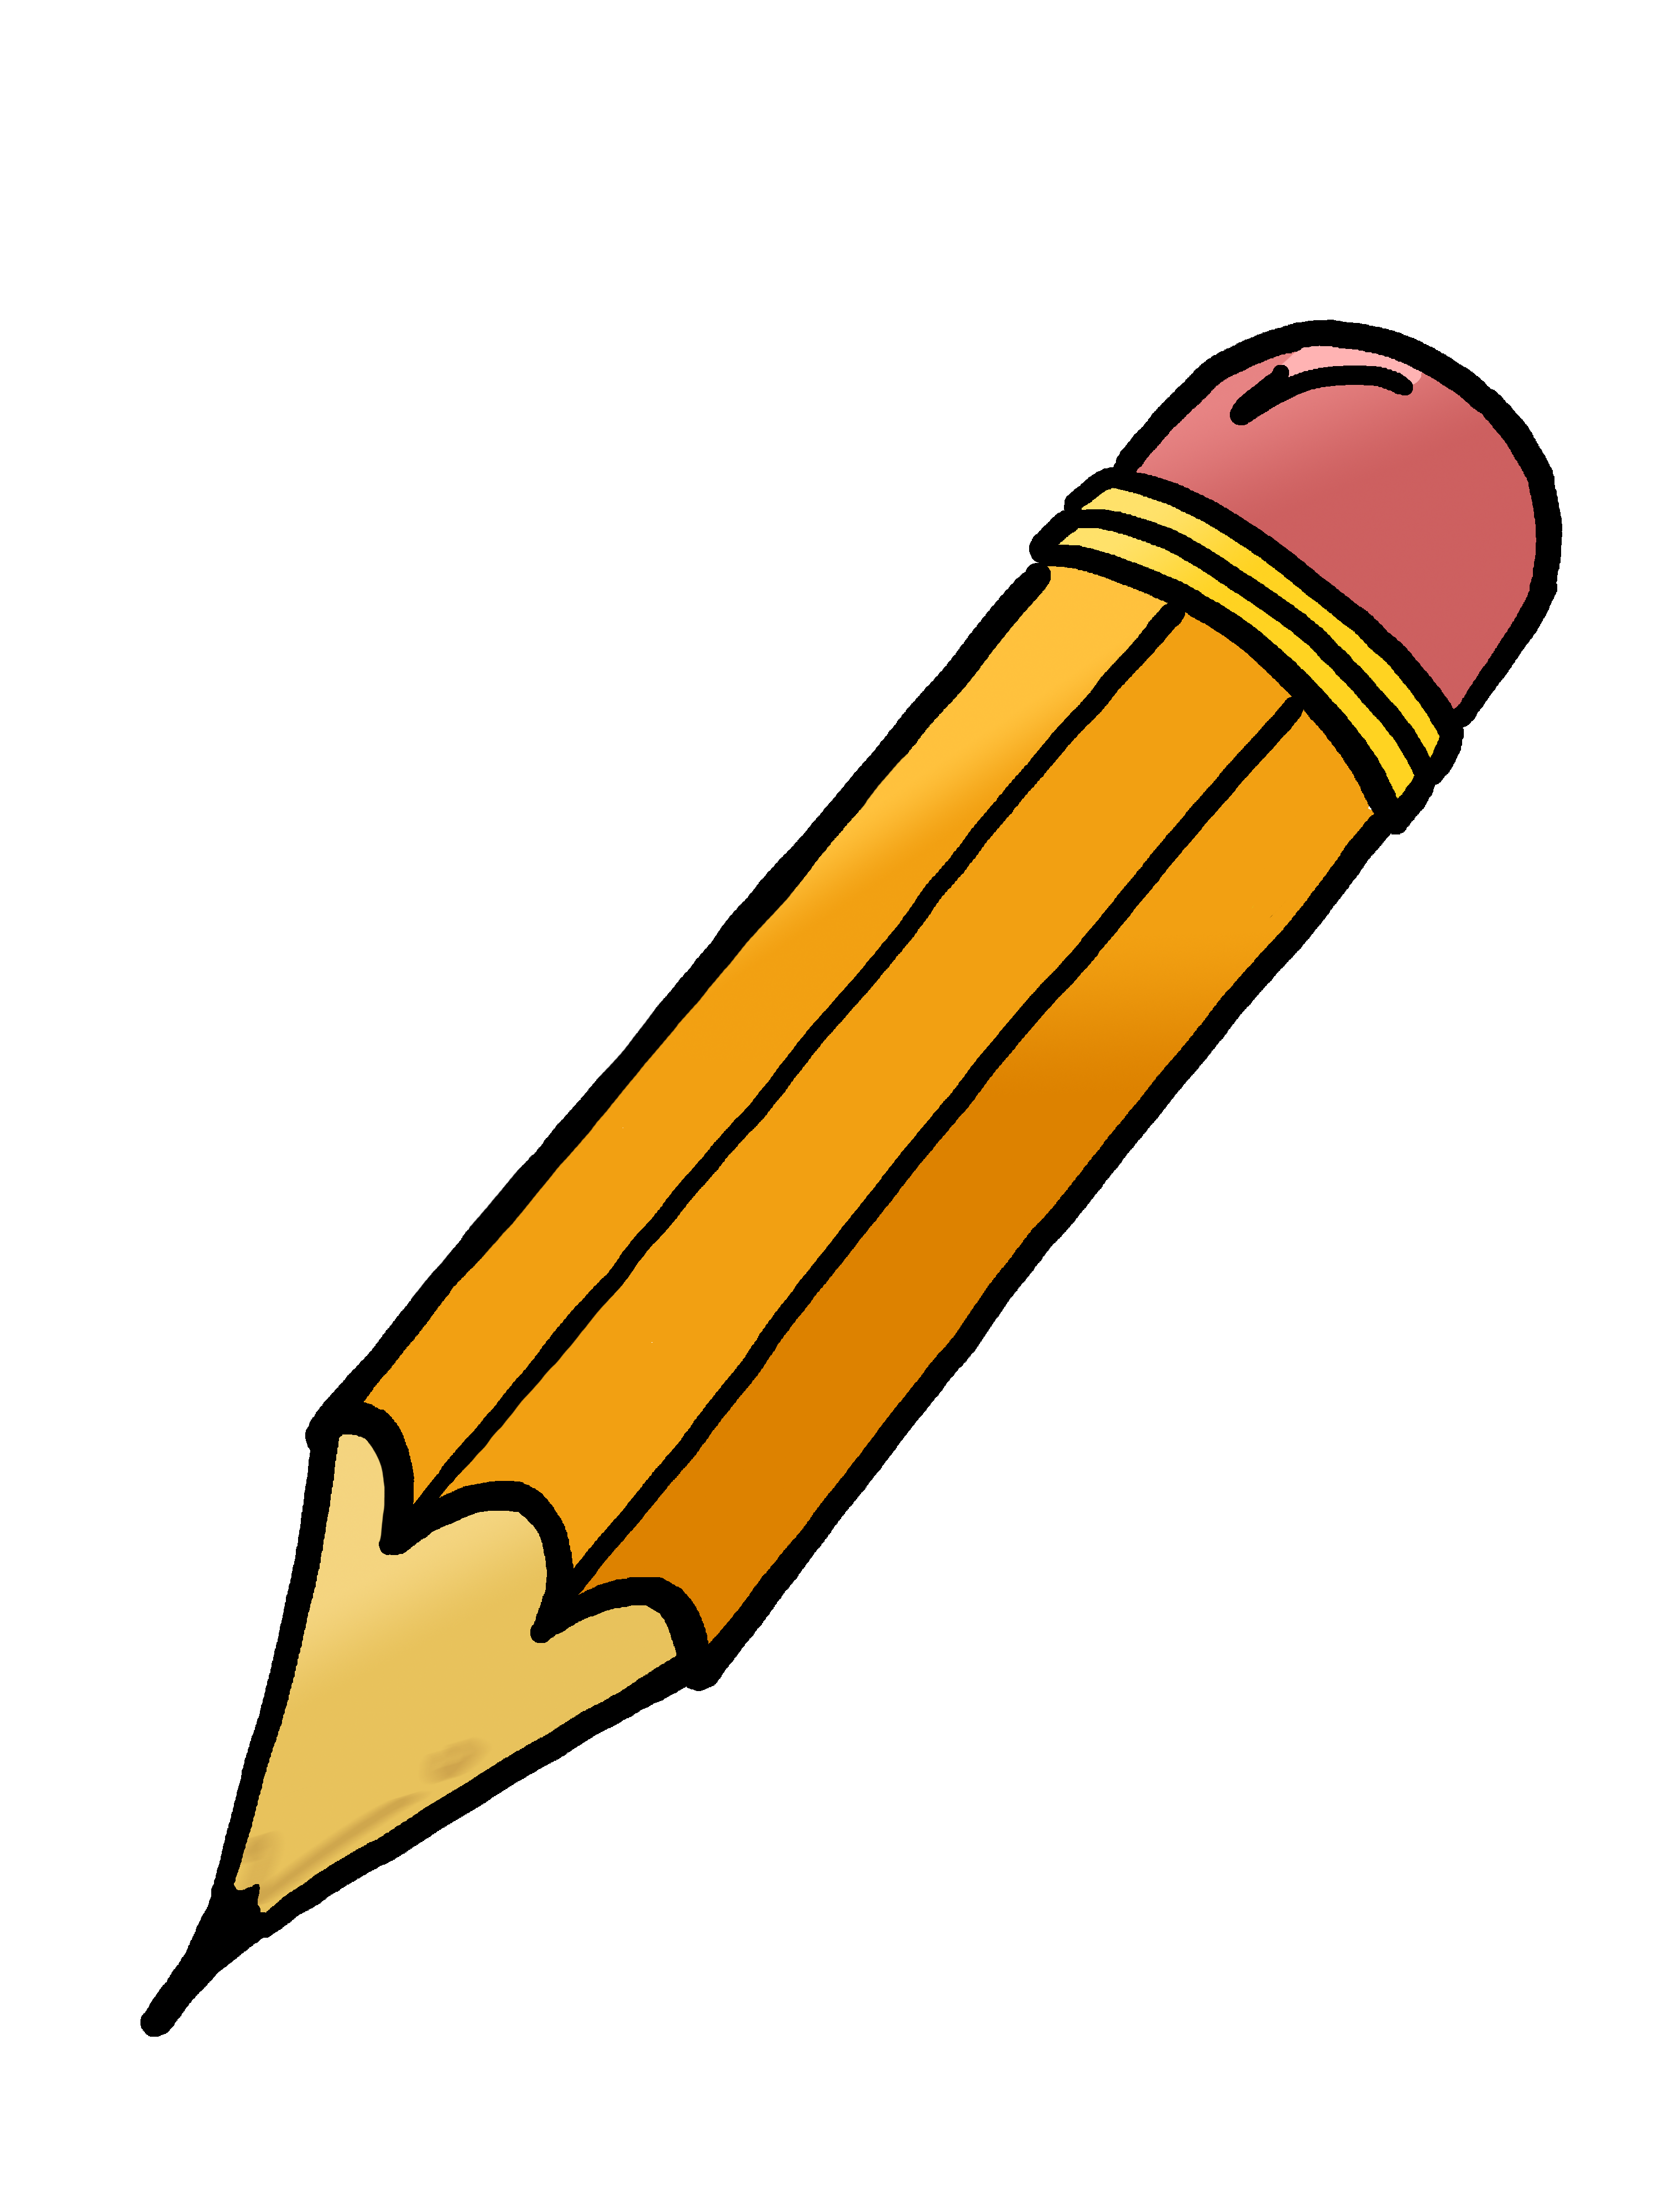 Pencil Box Clipart | Clipart library - Free Clipart Images